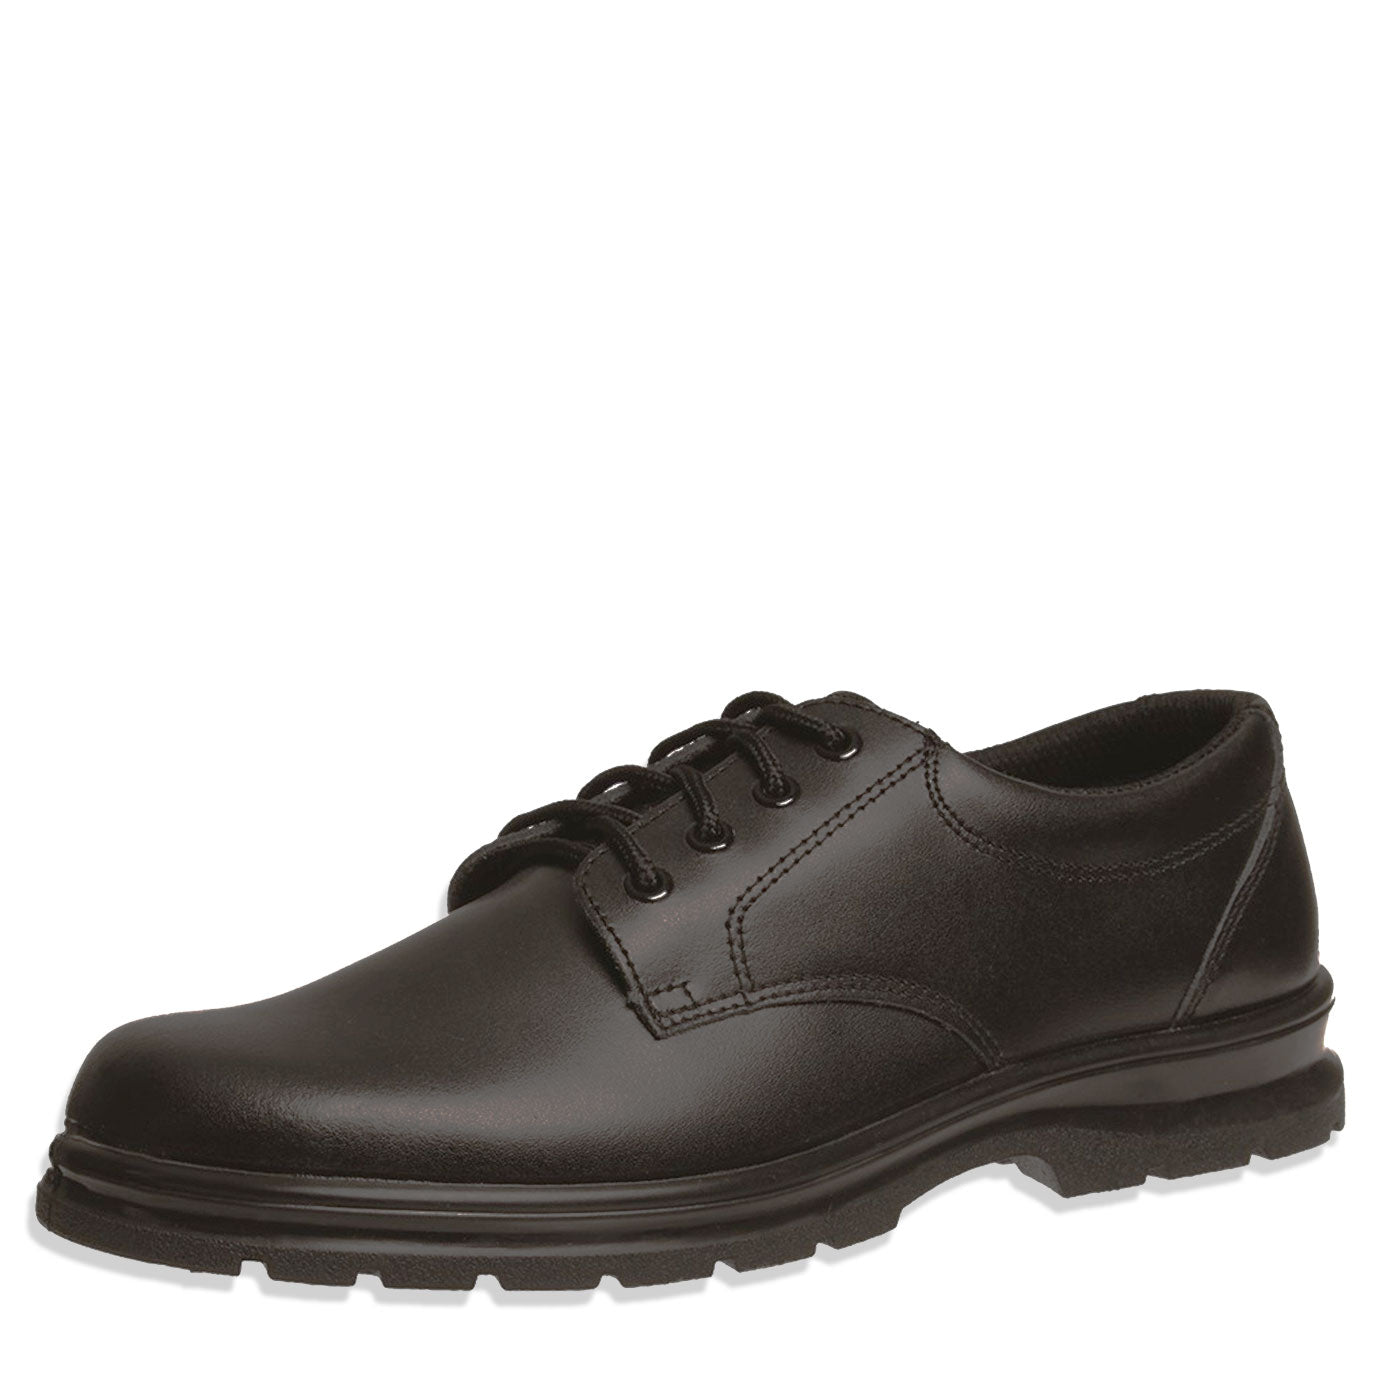 Grosby Leather School Shoes Lace-Up Black Educate JNR 2 UK Size 10-6